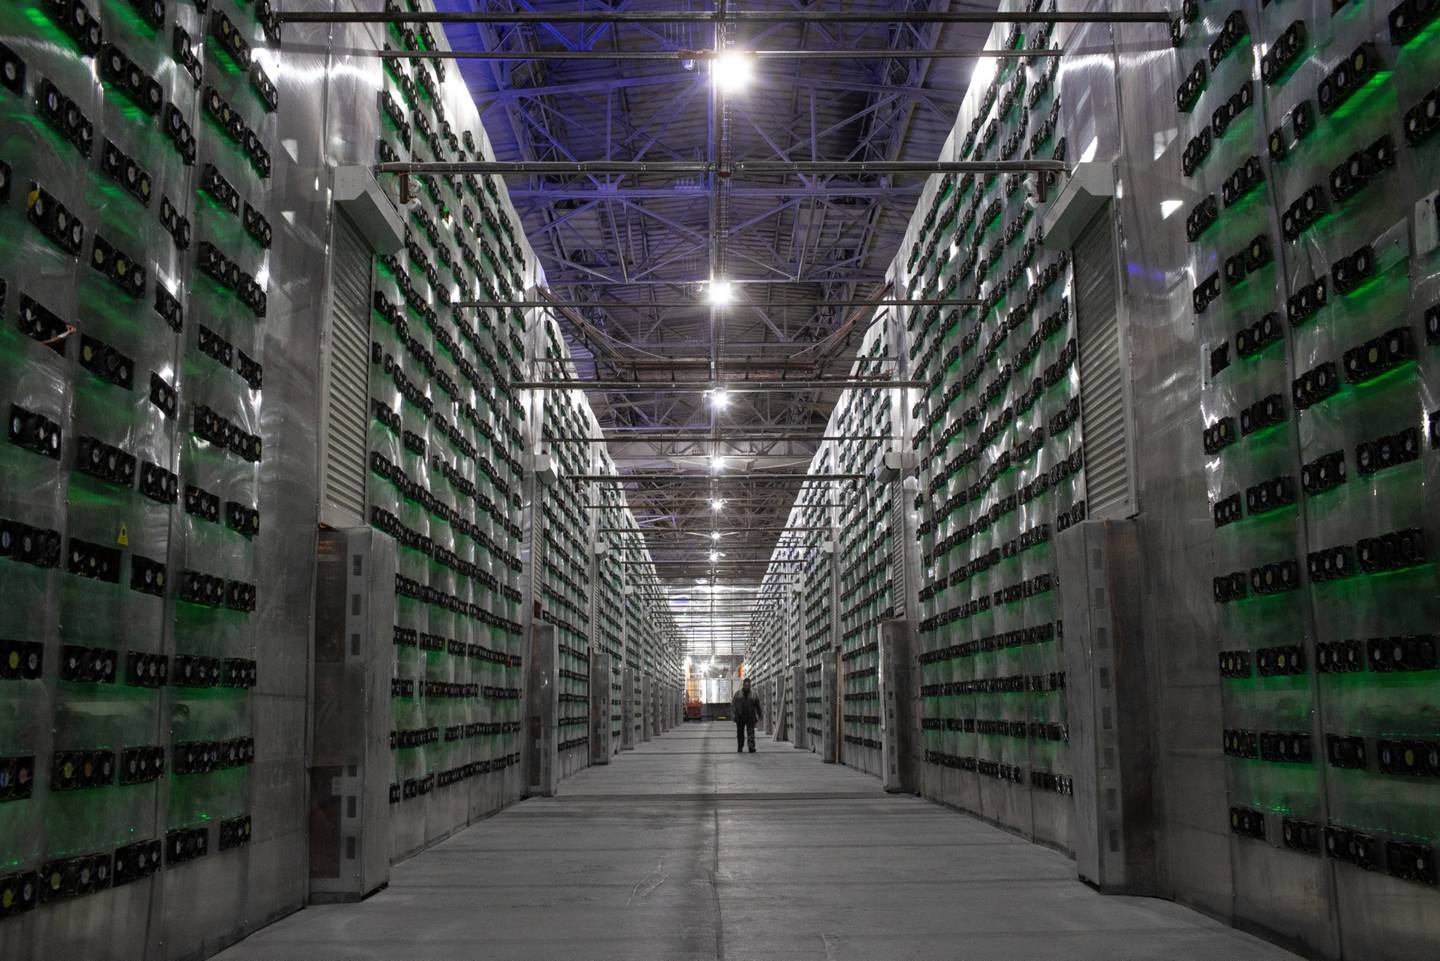 Racks of mining rigs at a cryptocurrency mining center in Nadvoitsy, Russia.